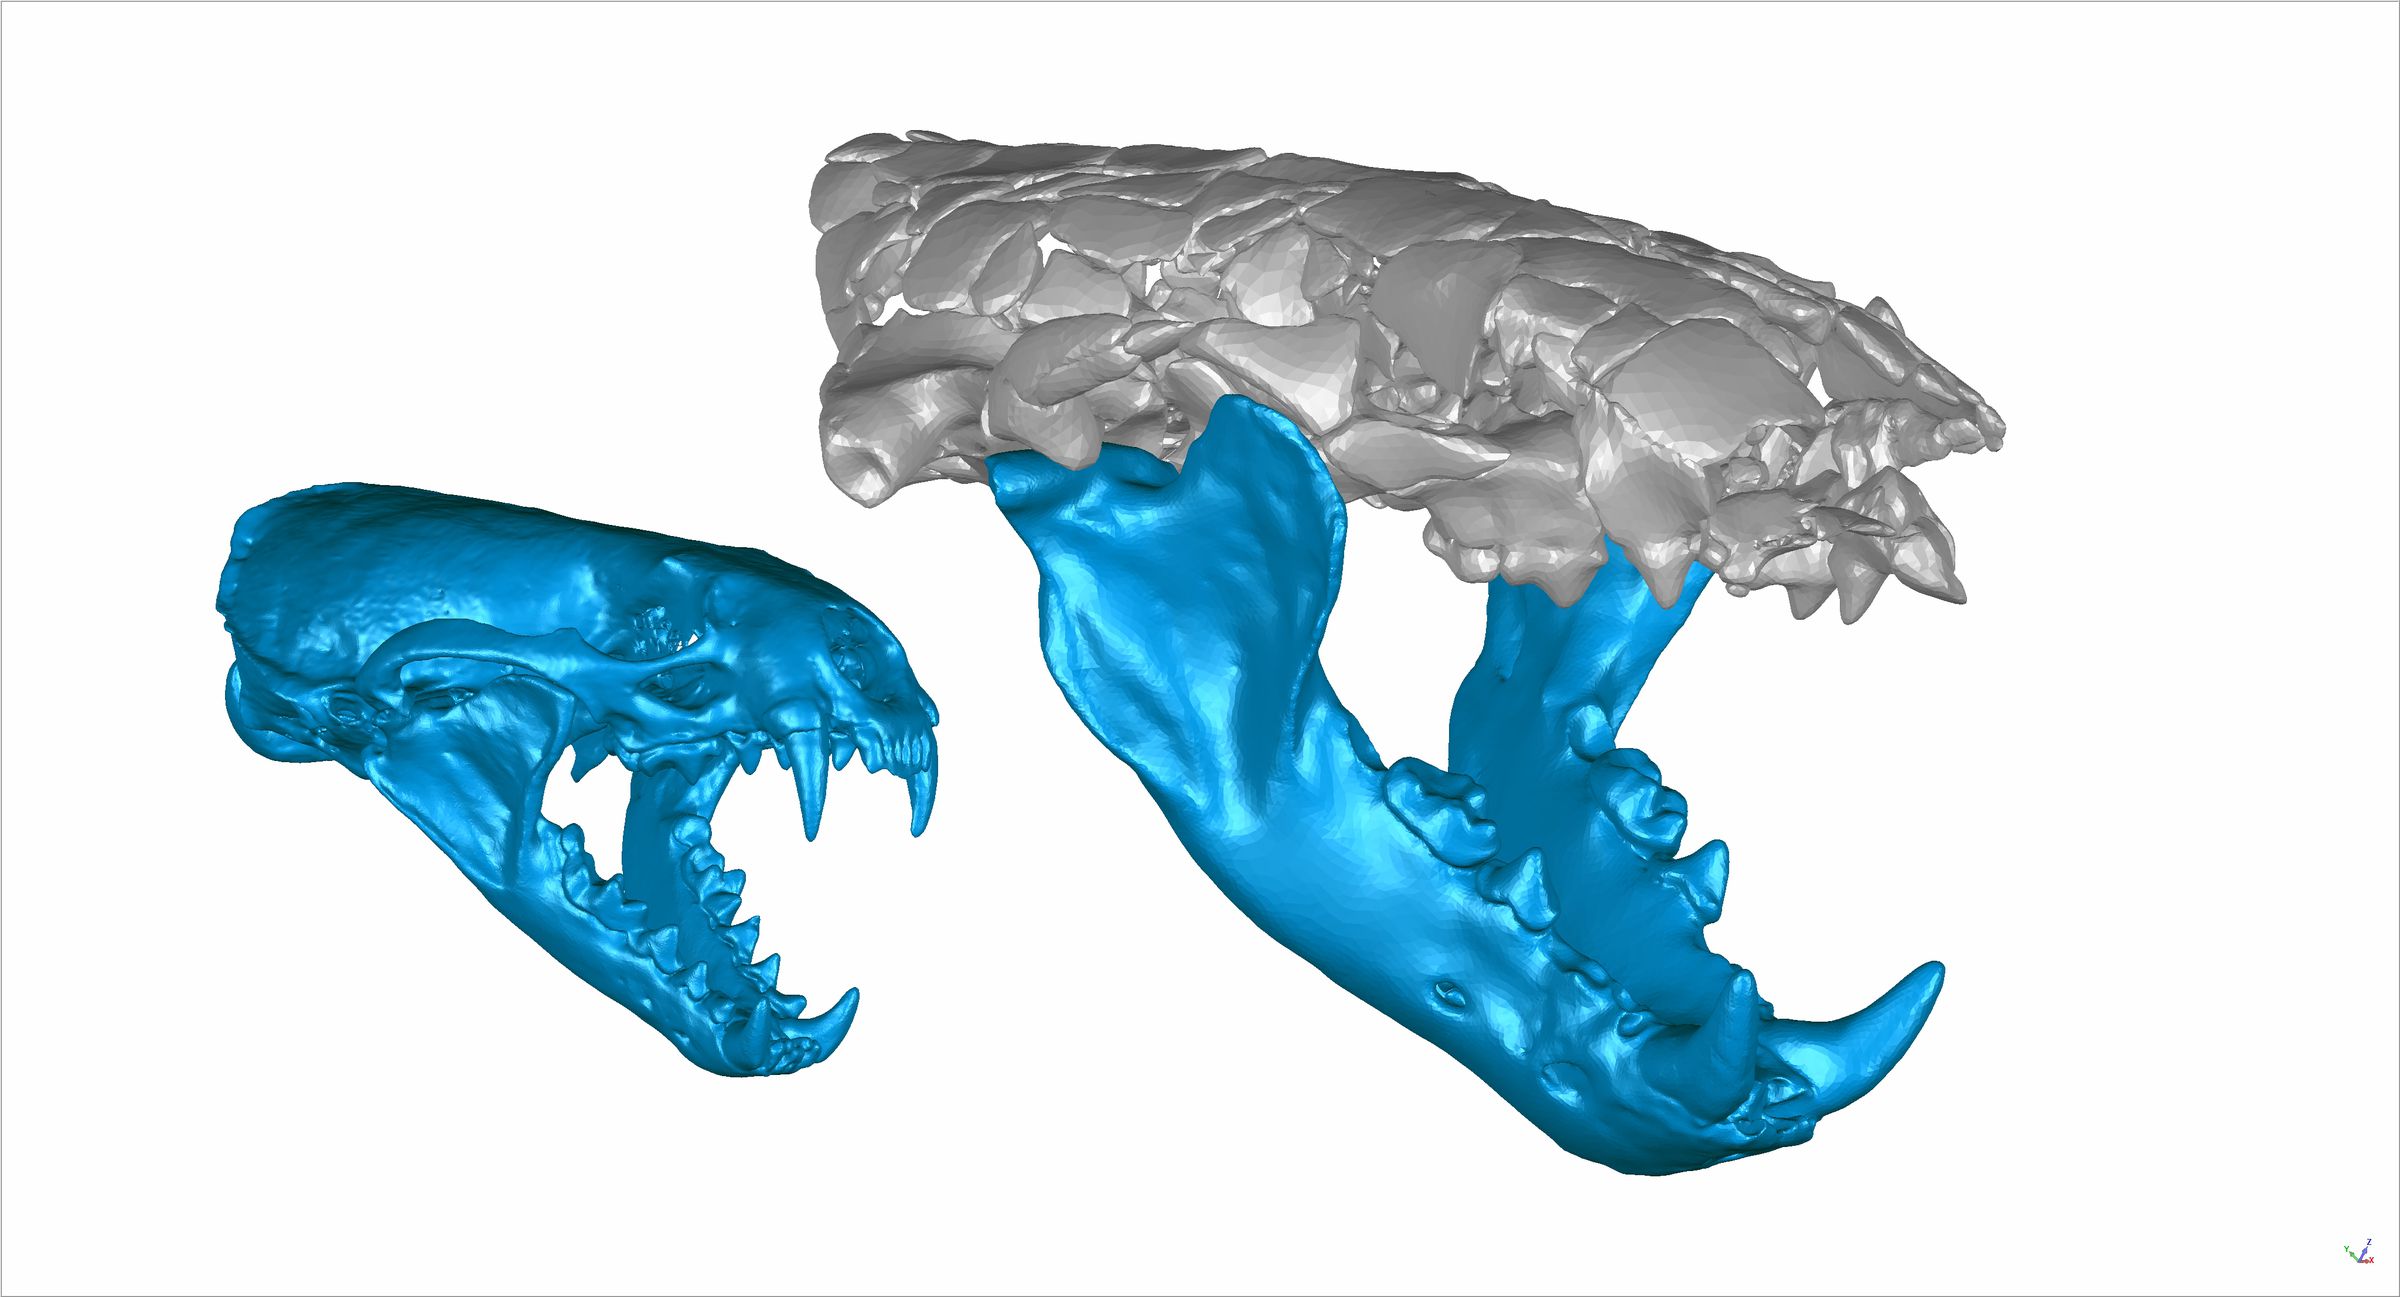 3D reconstructions of otter jaws: the Eurasian river otter on the left, and Siamogale melilutra on the right.